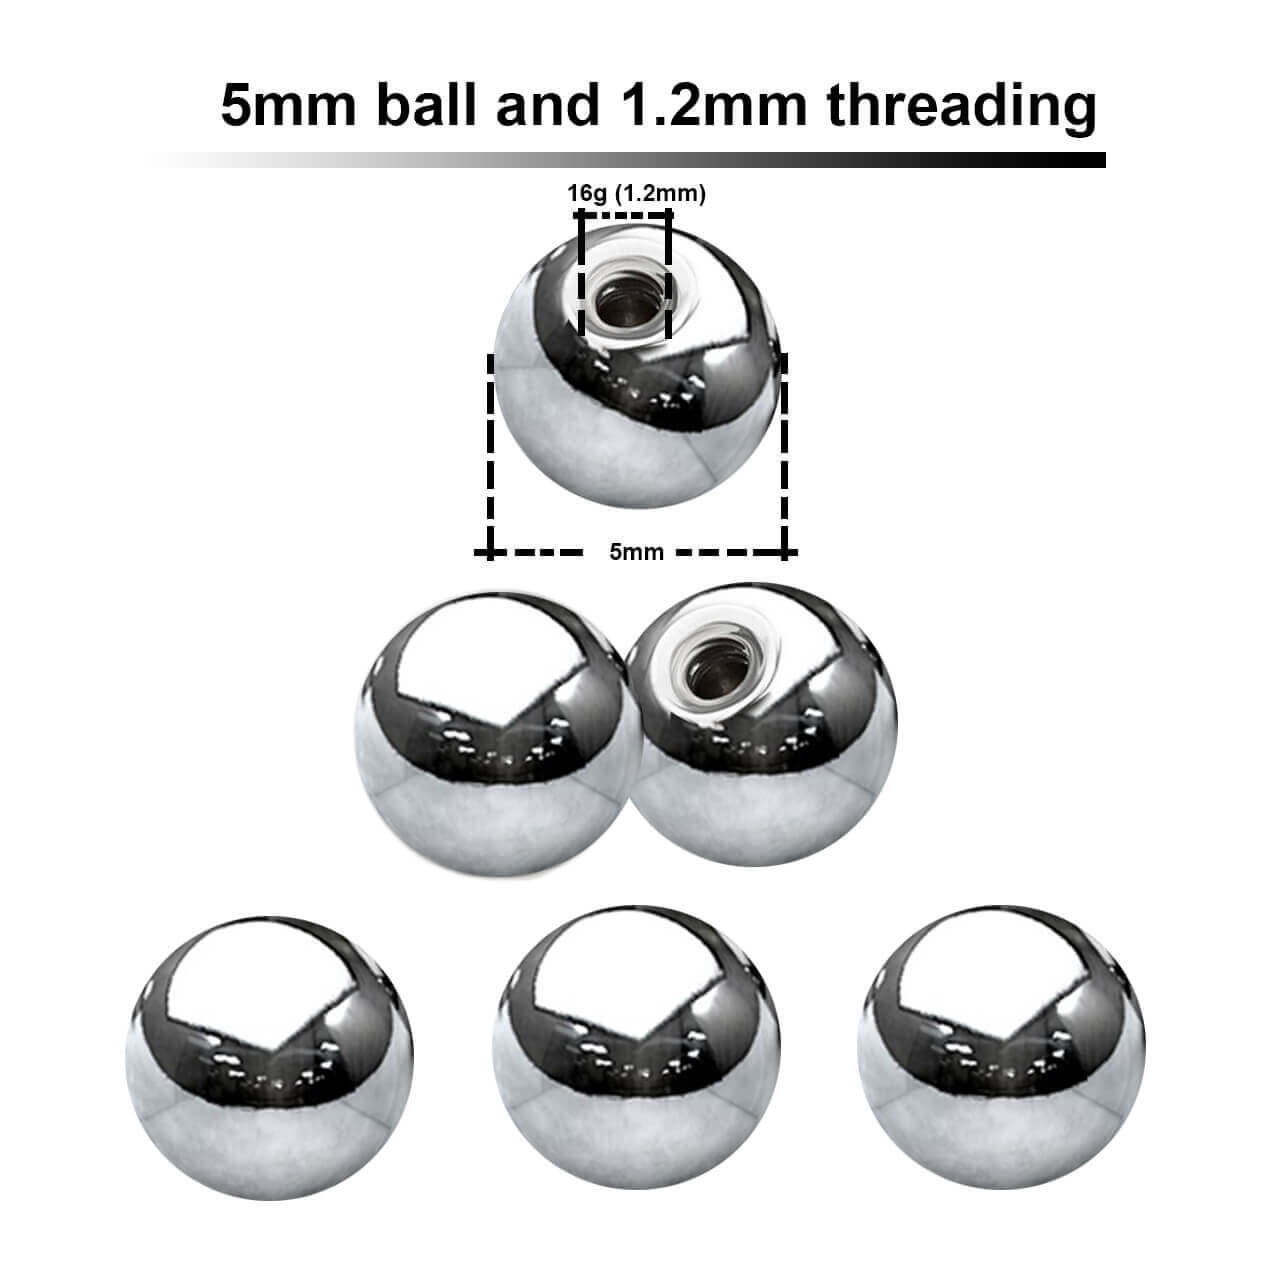 SYB12N5 Piercing studio supplies: Pack of 25 high polished surgical steel balls with 5mm diameter and a 1.2mm threading